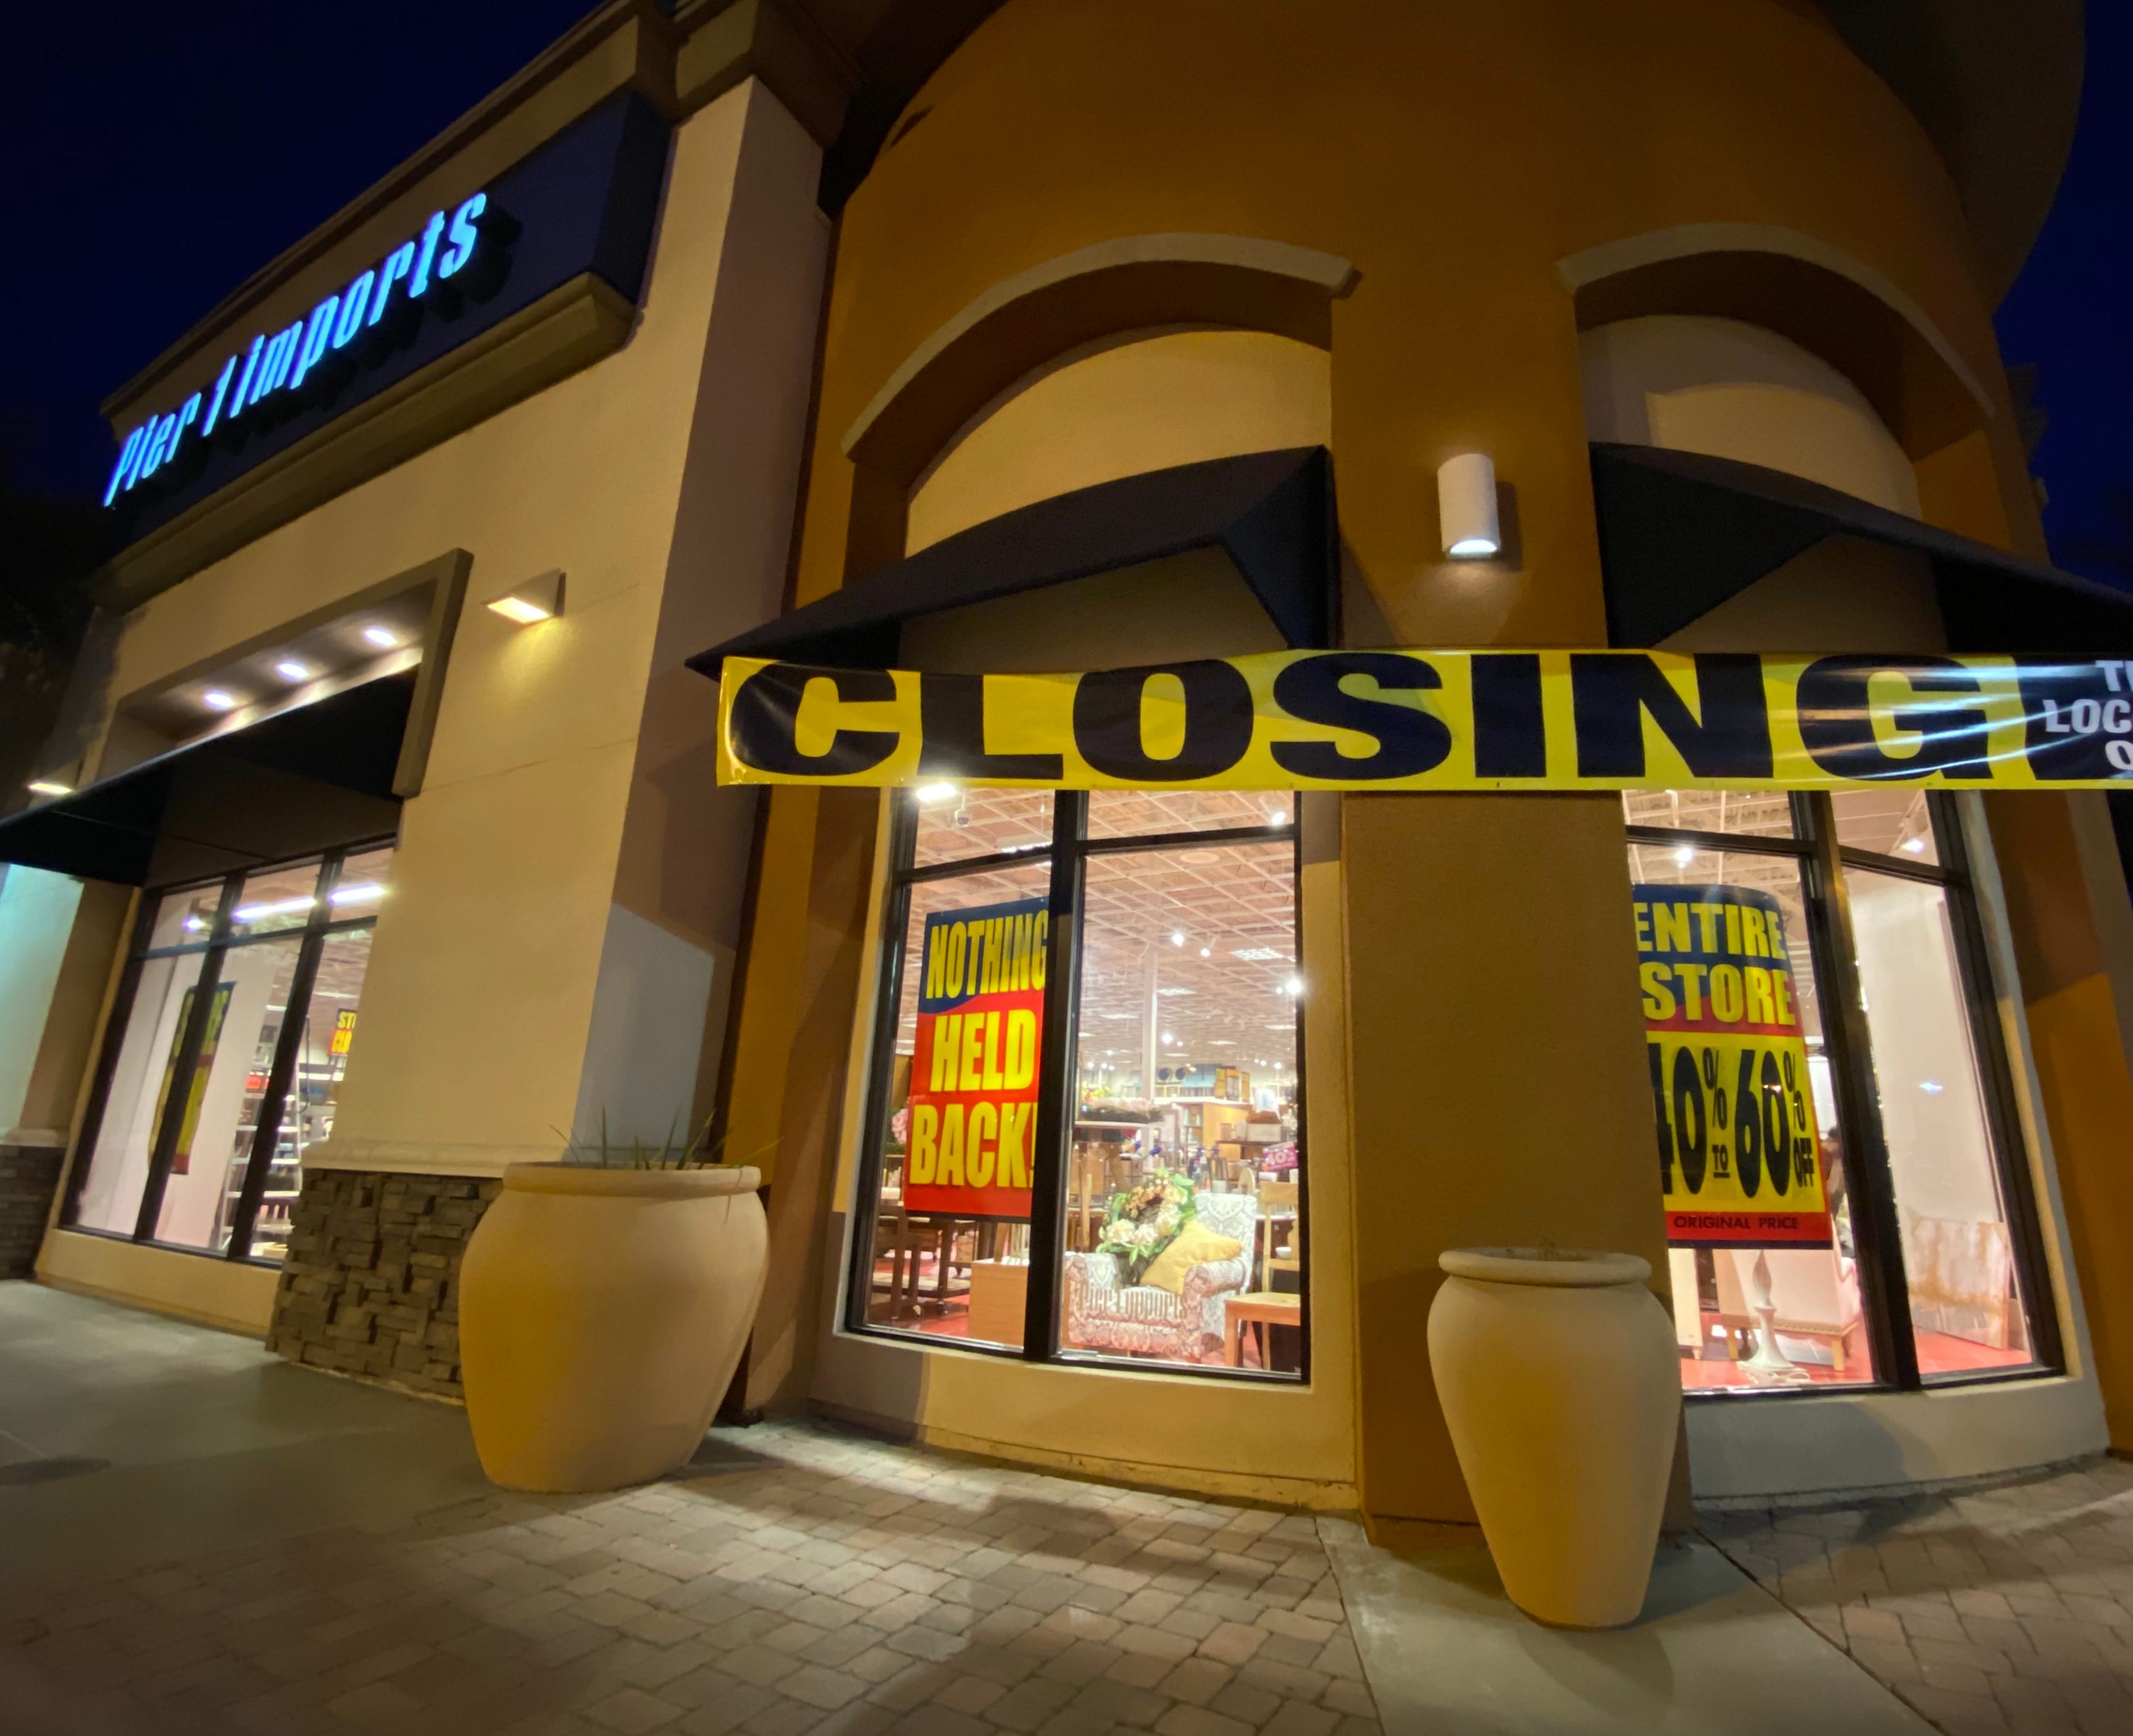 Pier 1 Imports Store Closings 2020 These Locations Will Shutter Soon